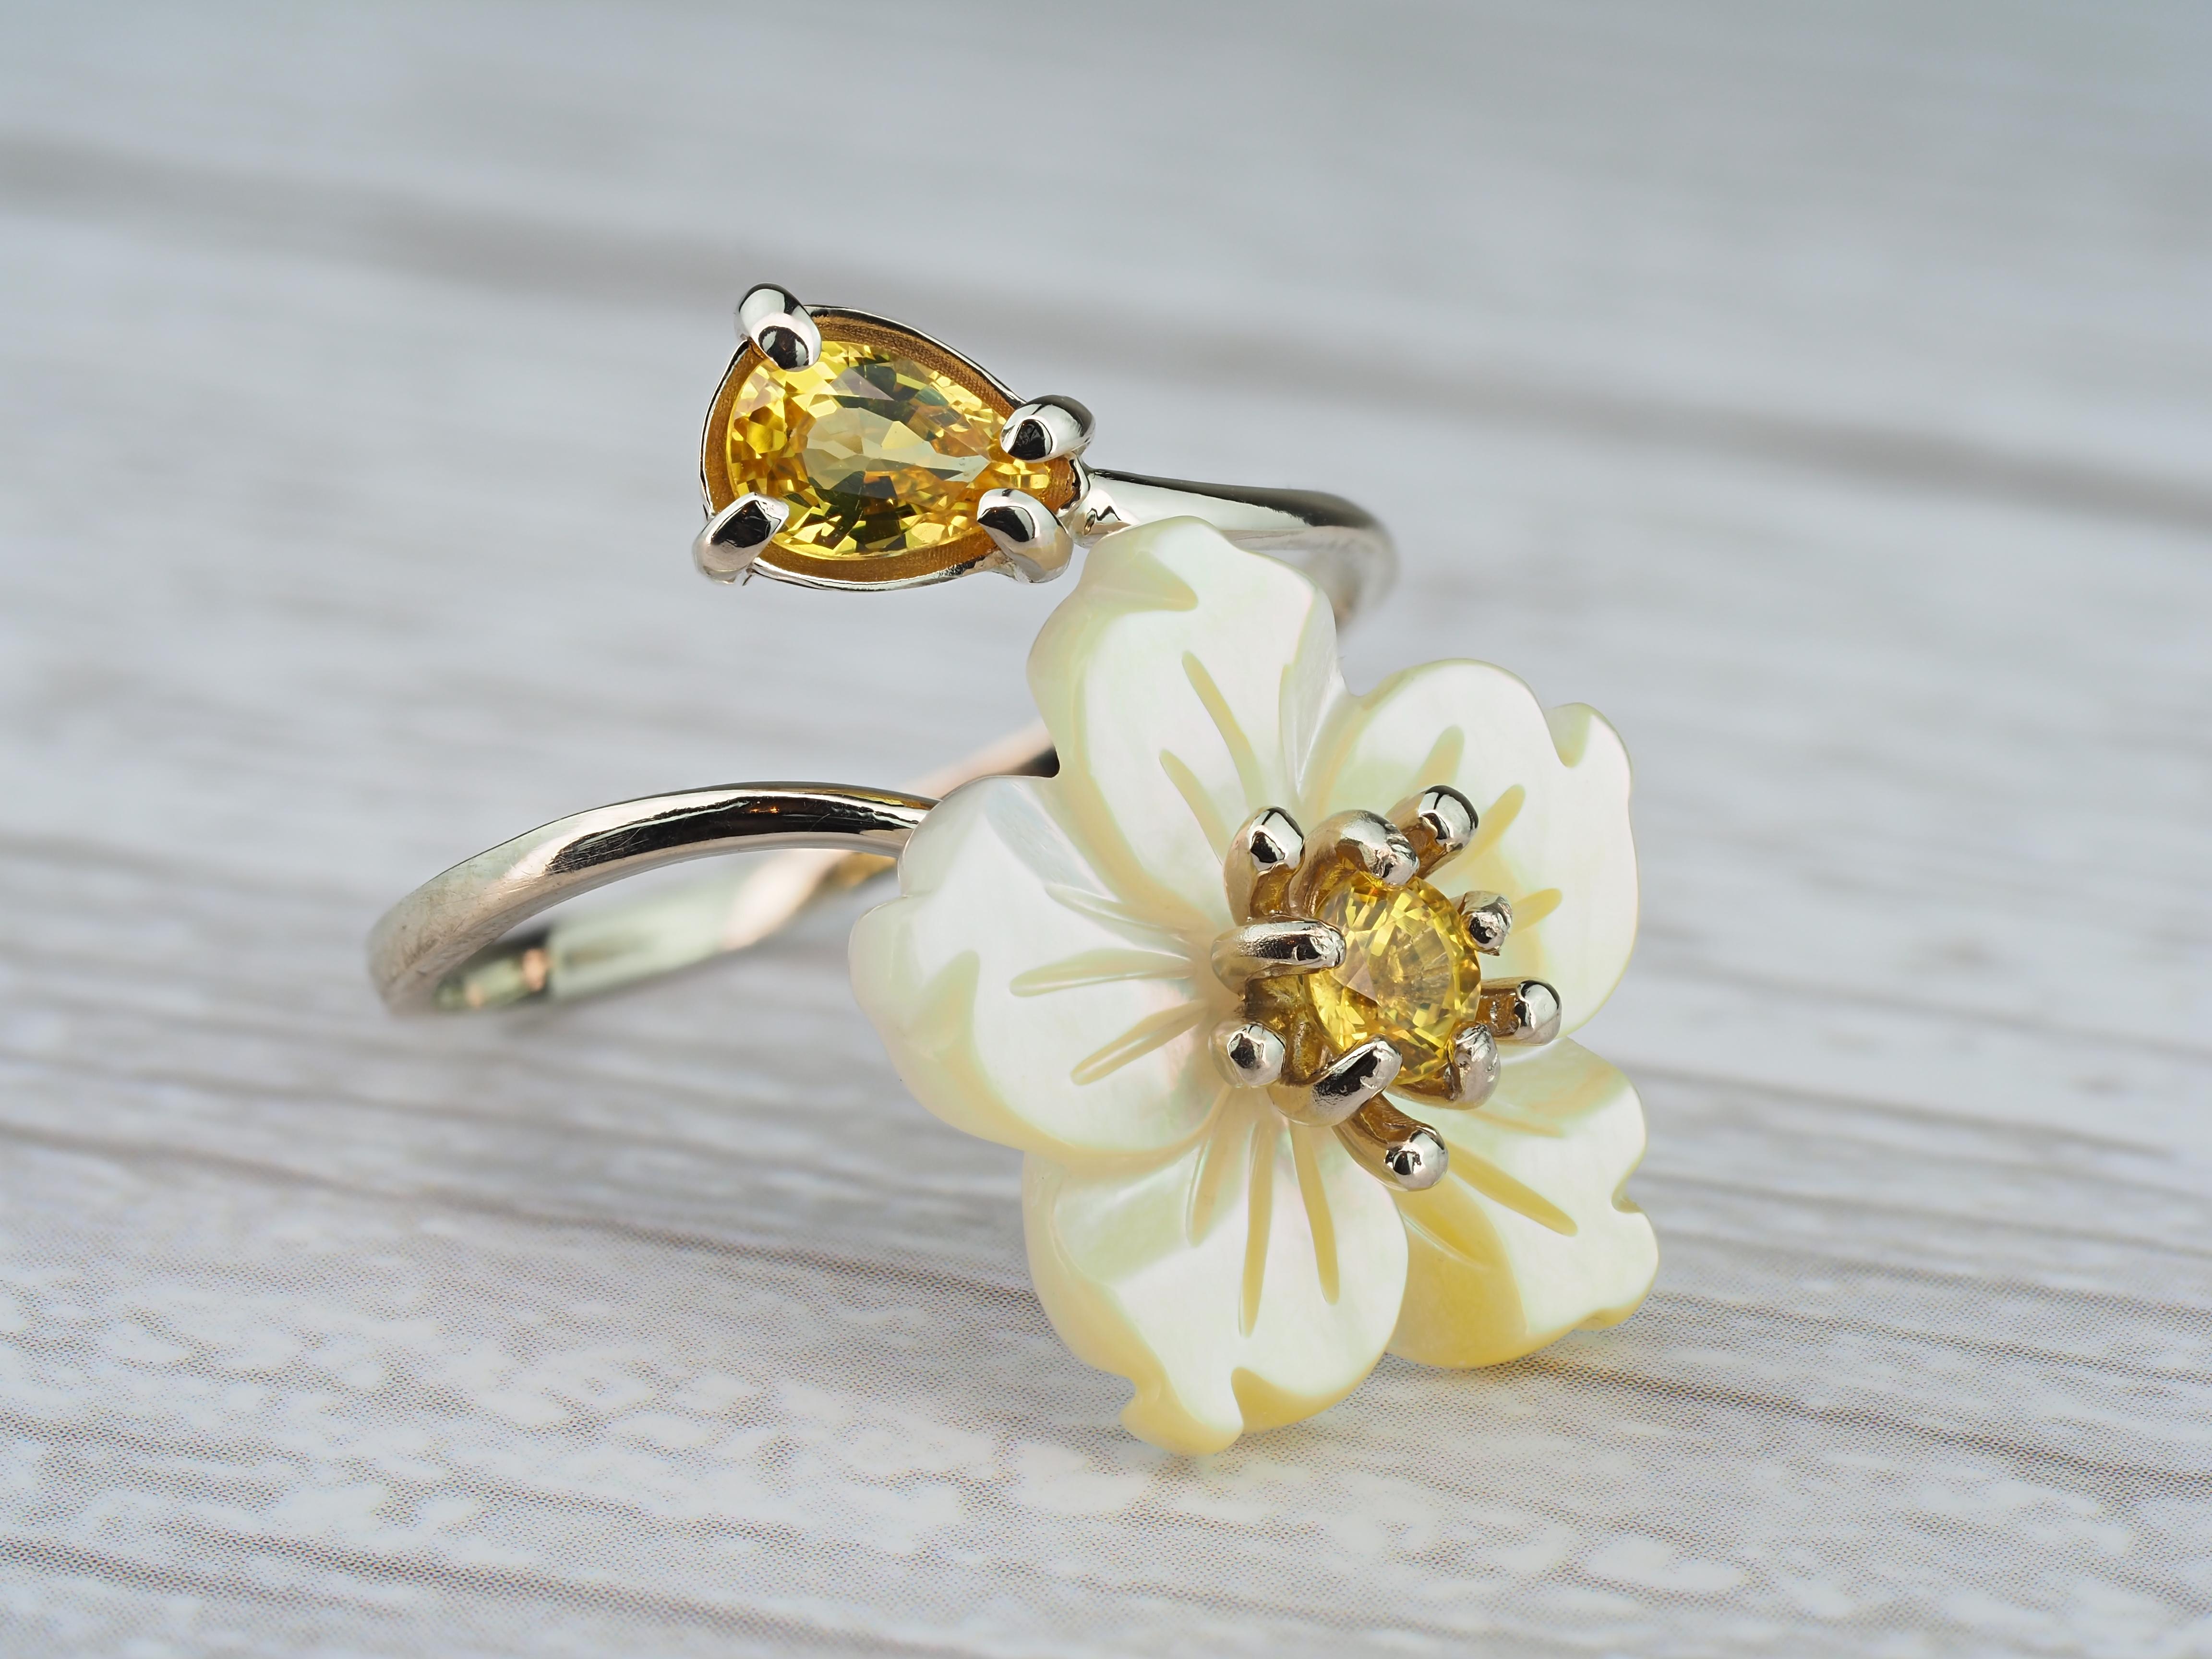 Yellow Sapphire Ring in 14k Gold, Genuine Sapphire Gold Ring 1